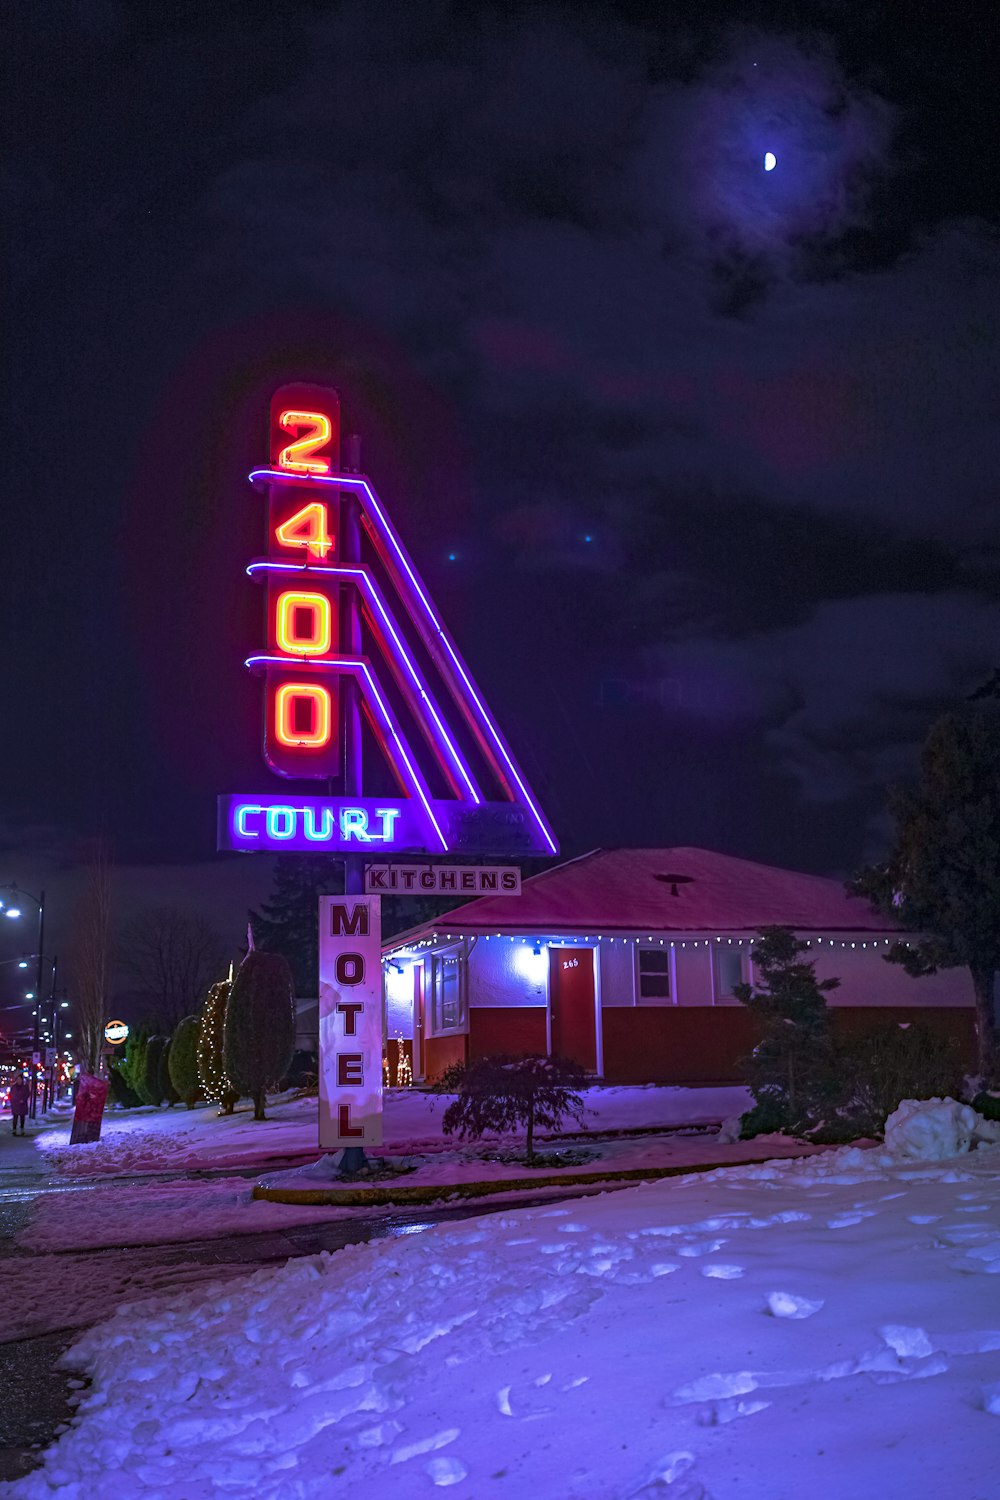 a motel sign lit up at night in the snow